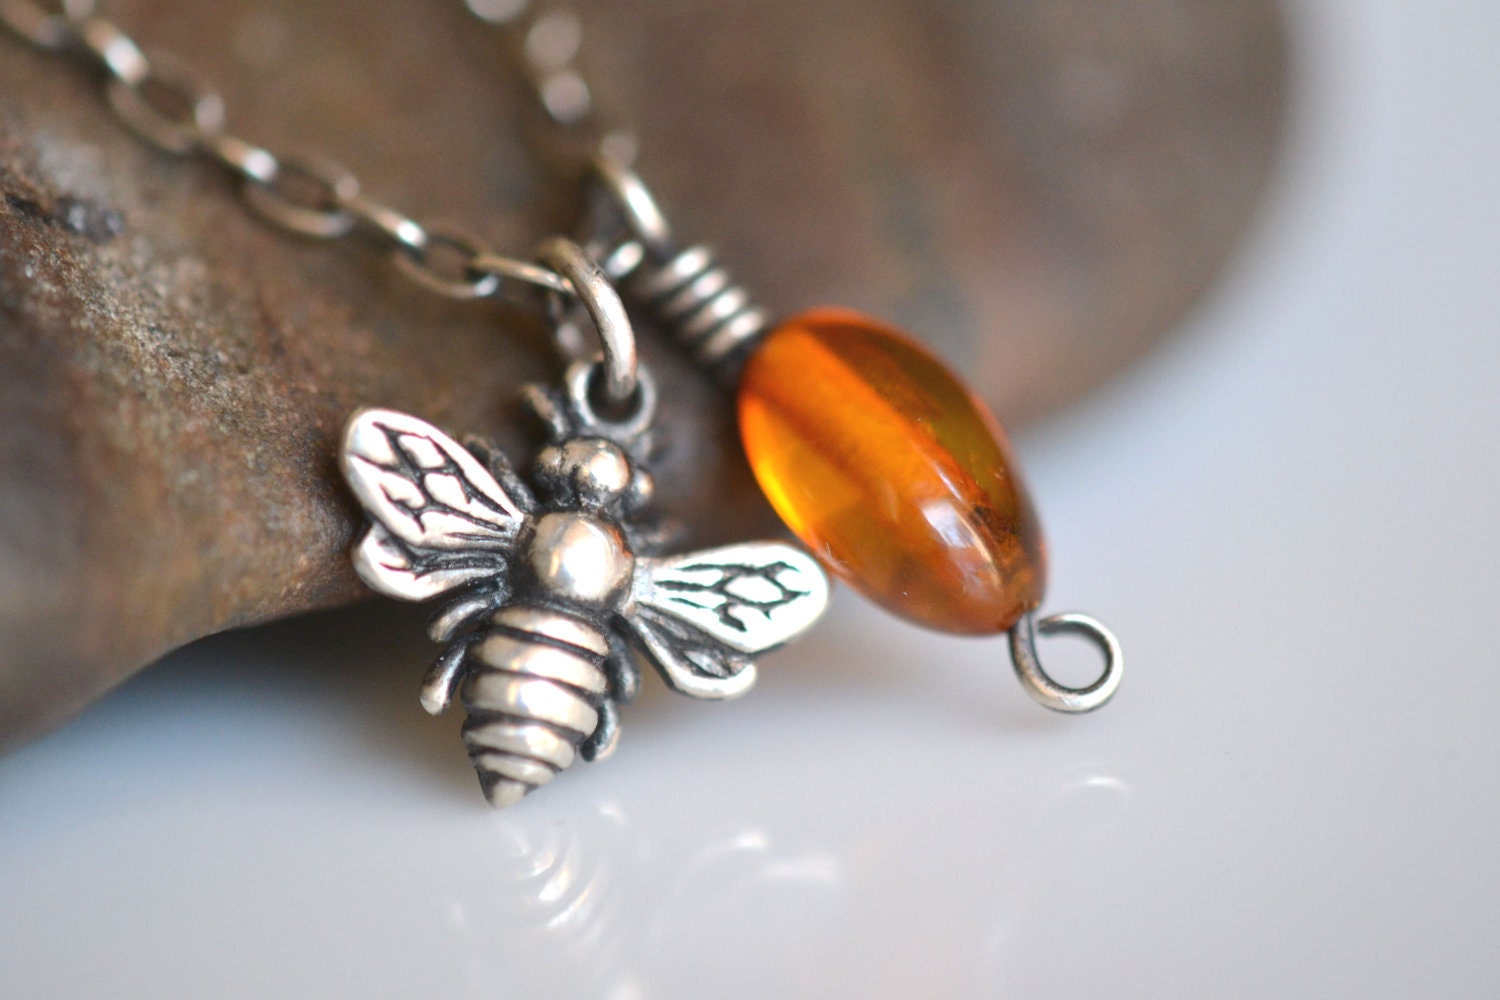 Bee Necklace, amber necklace, bee jewelry, amber jewelry, autumn jewelry, charm necklace, sterling silver handmade necklace, bug jewelry - Illuminista